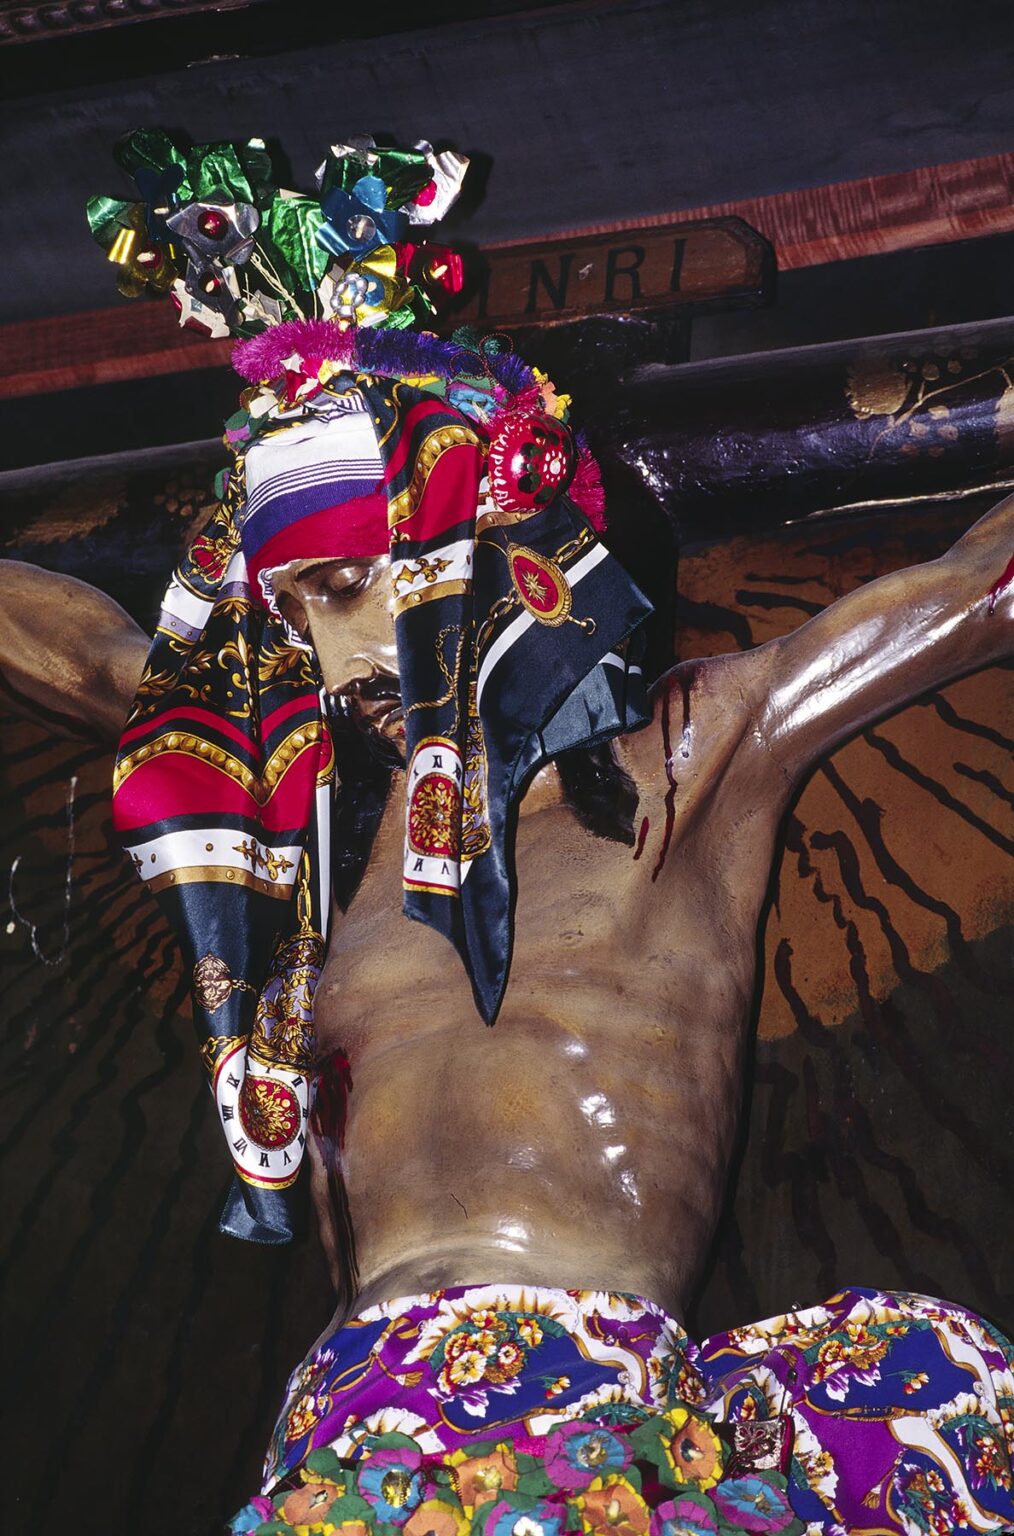 CHRIST FIGURE clothed in INDIAN TEXTILES, the marriage of PAGAN and CHRISTIAN RITUAL - SANTIAGO ATITLAN, GUATEMALA